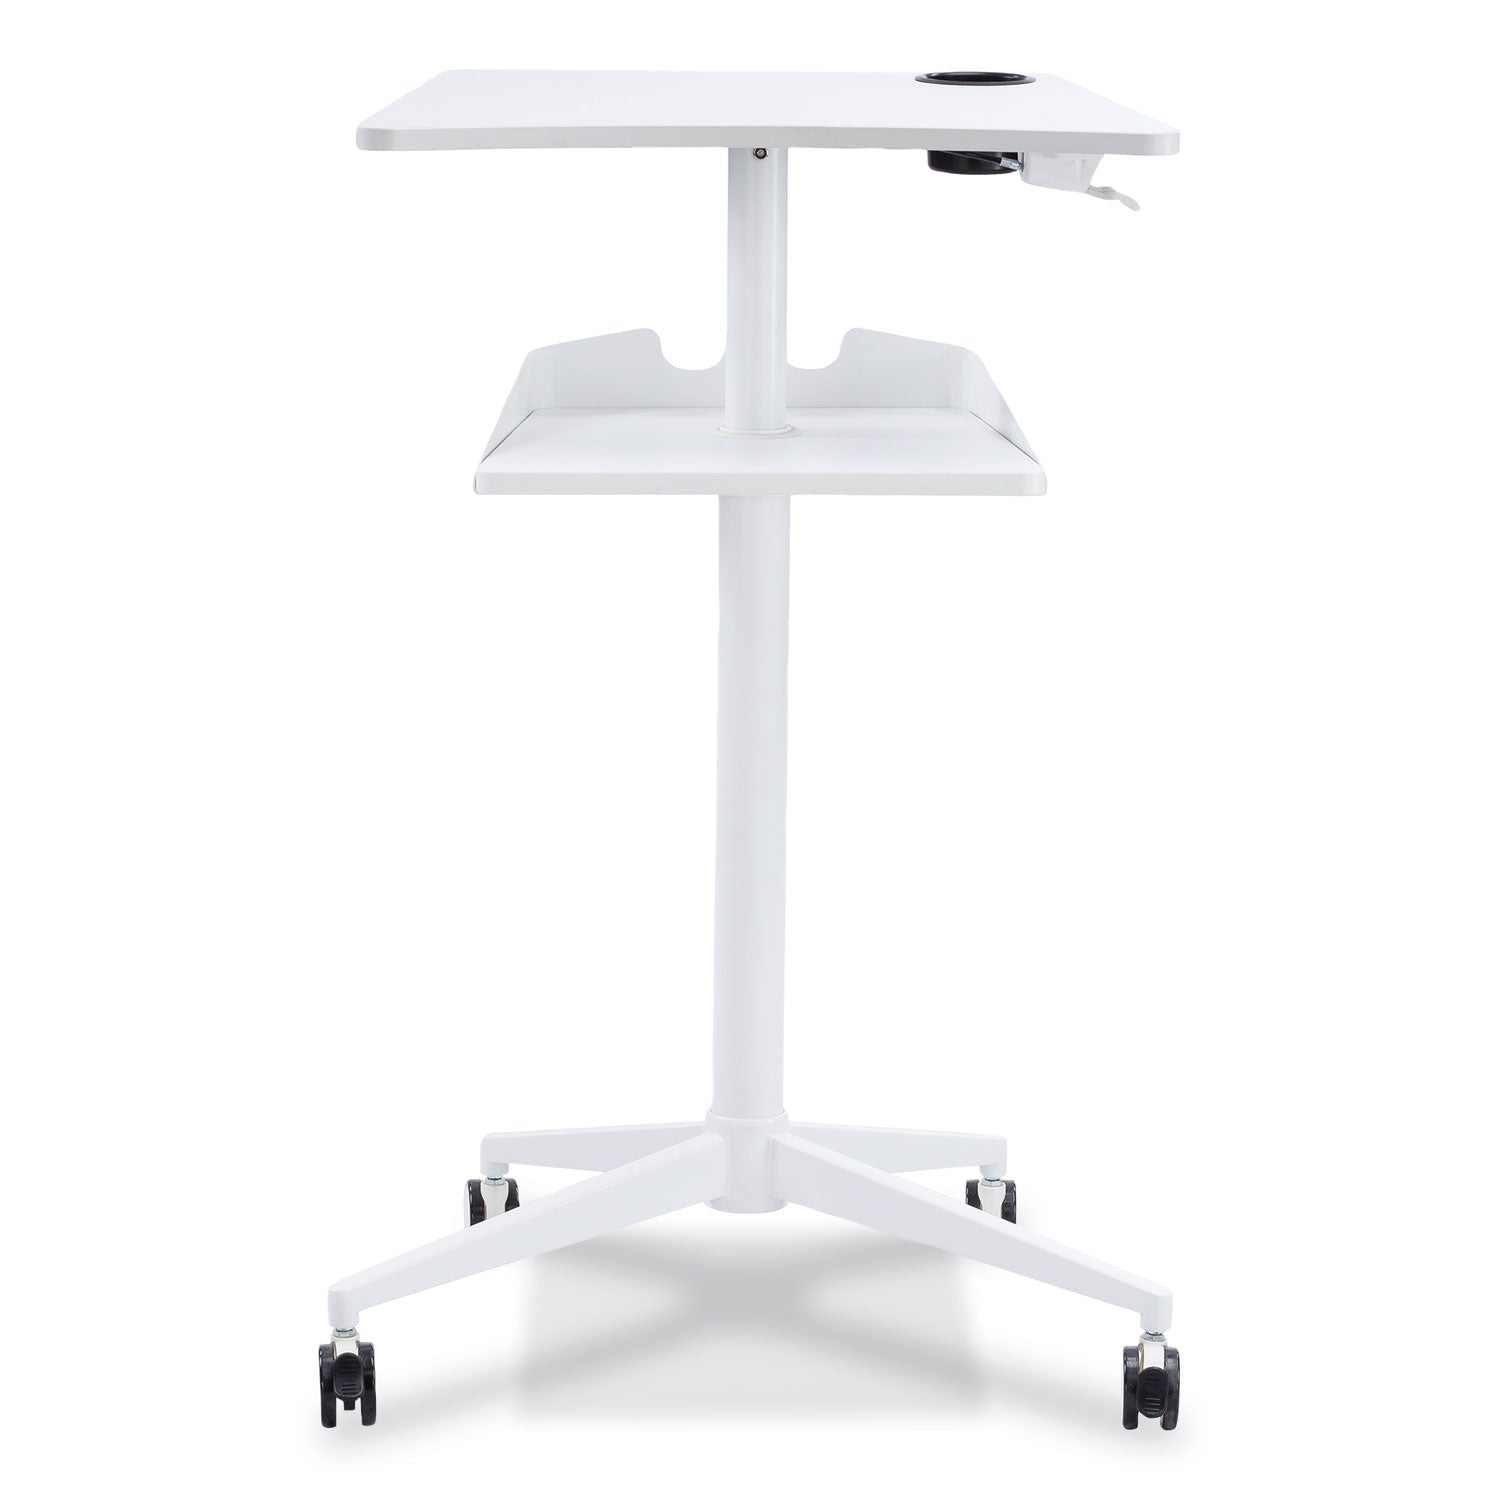 Safco Active Collection Vum Mobile Workstation - 25.3" x 19.8"47.8" - 2 Shelve(s) - Finish: White - 3